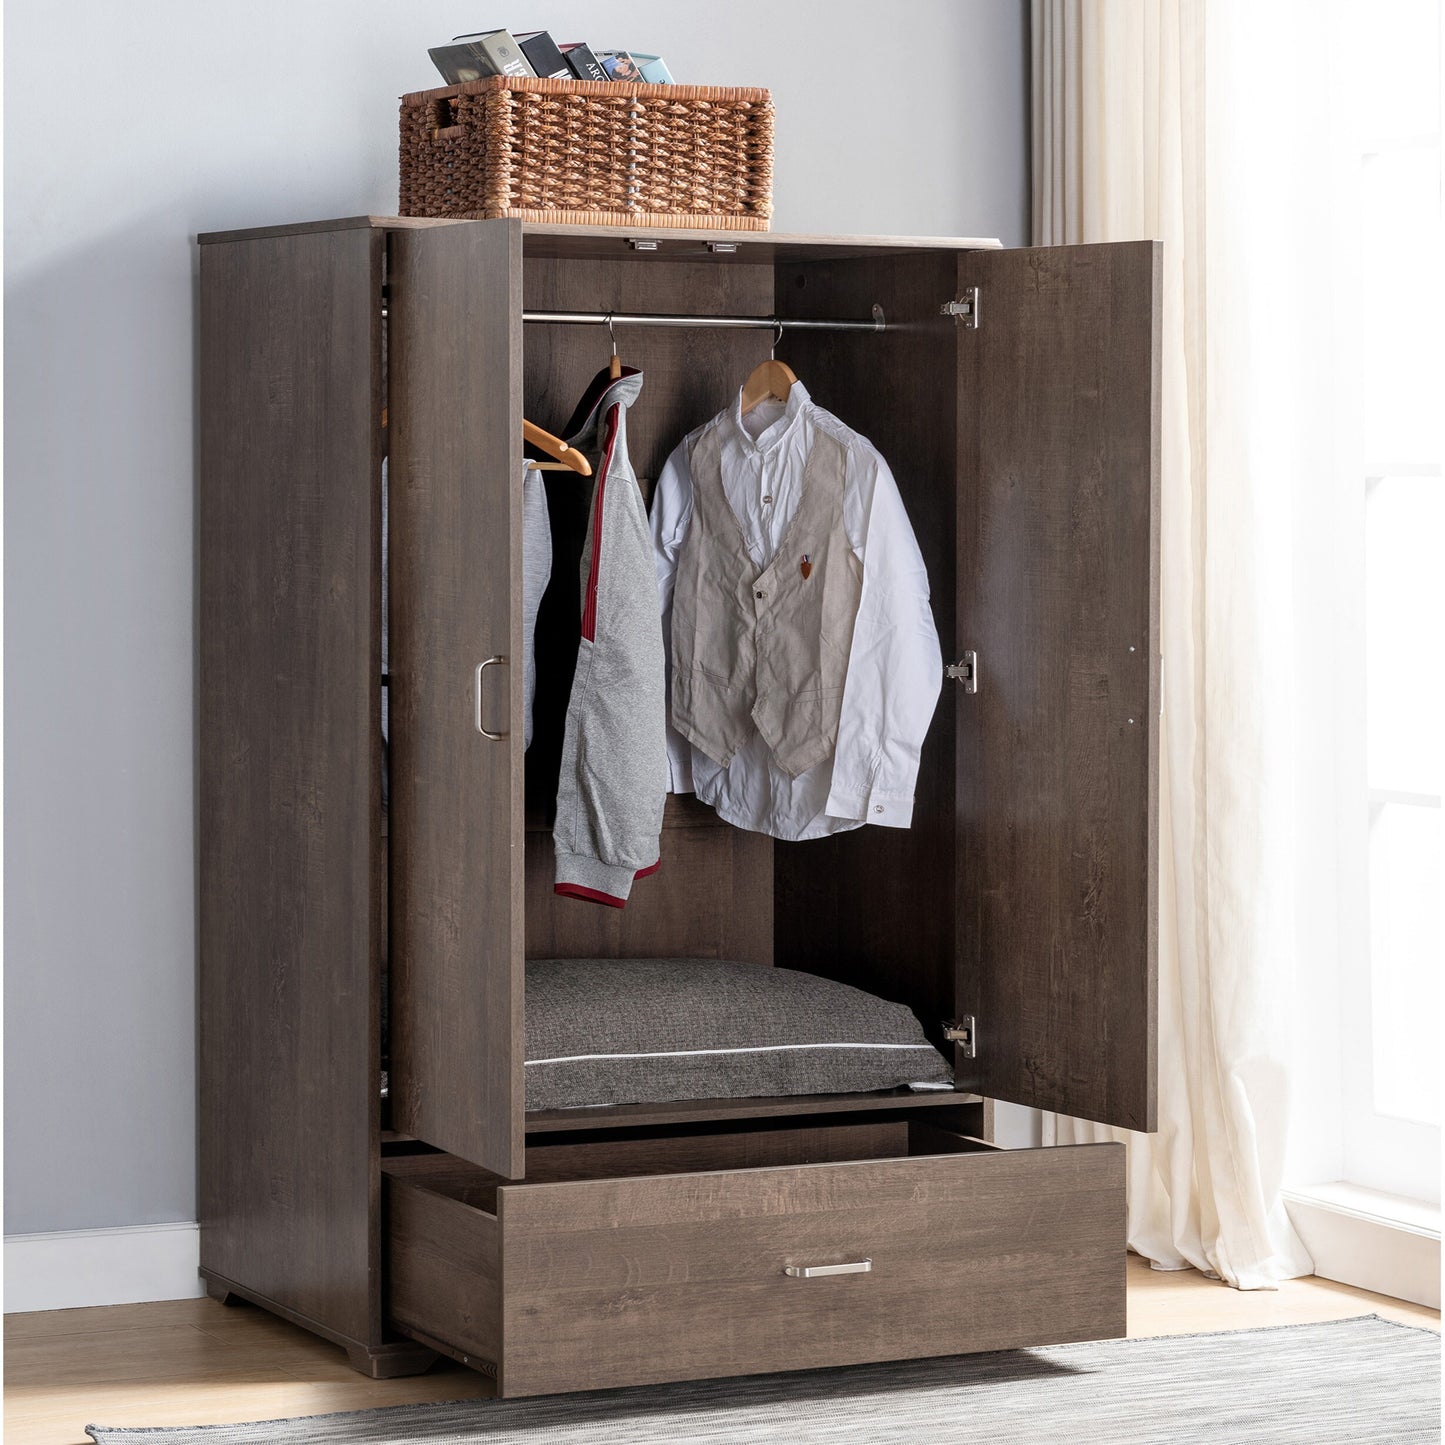 Right angled contemporary walnut two-door one-drawer wardrobe armoire with doors and drawer open in a bedroom with accessories